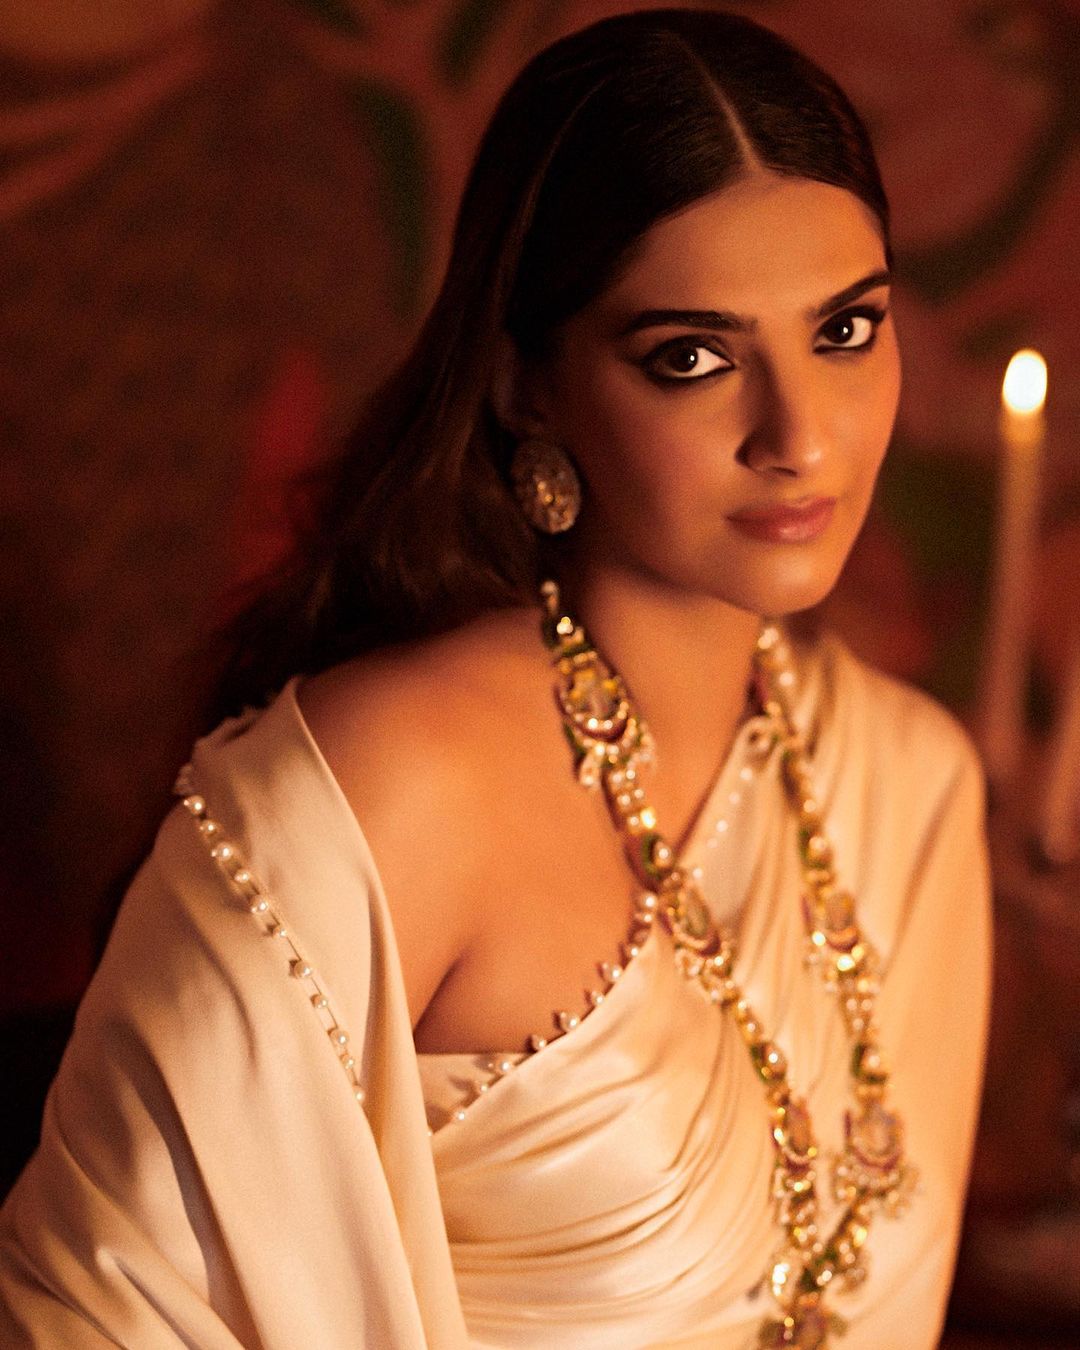 Sonam Kapoor has been styled by younger sister, Rhea Kapoor